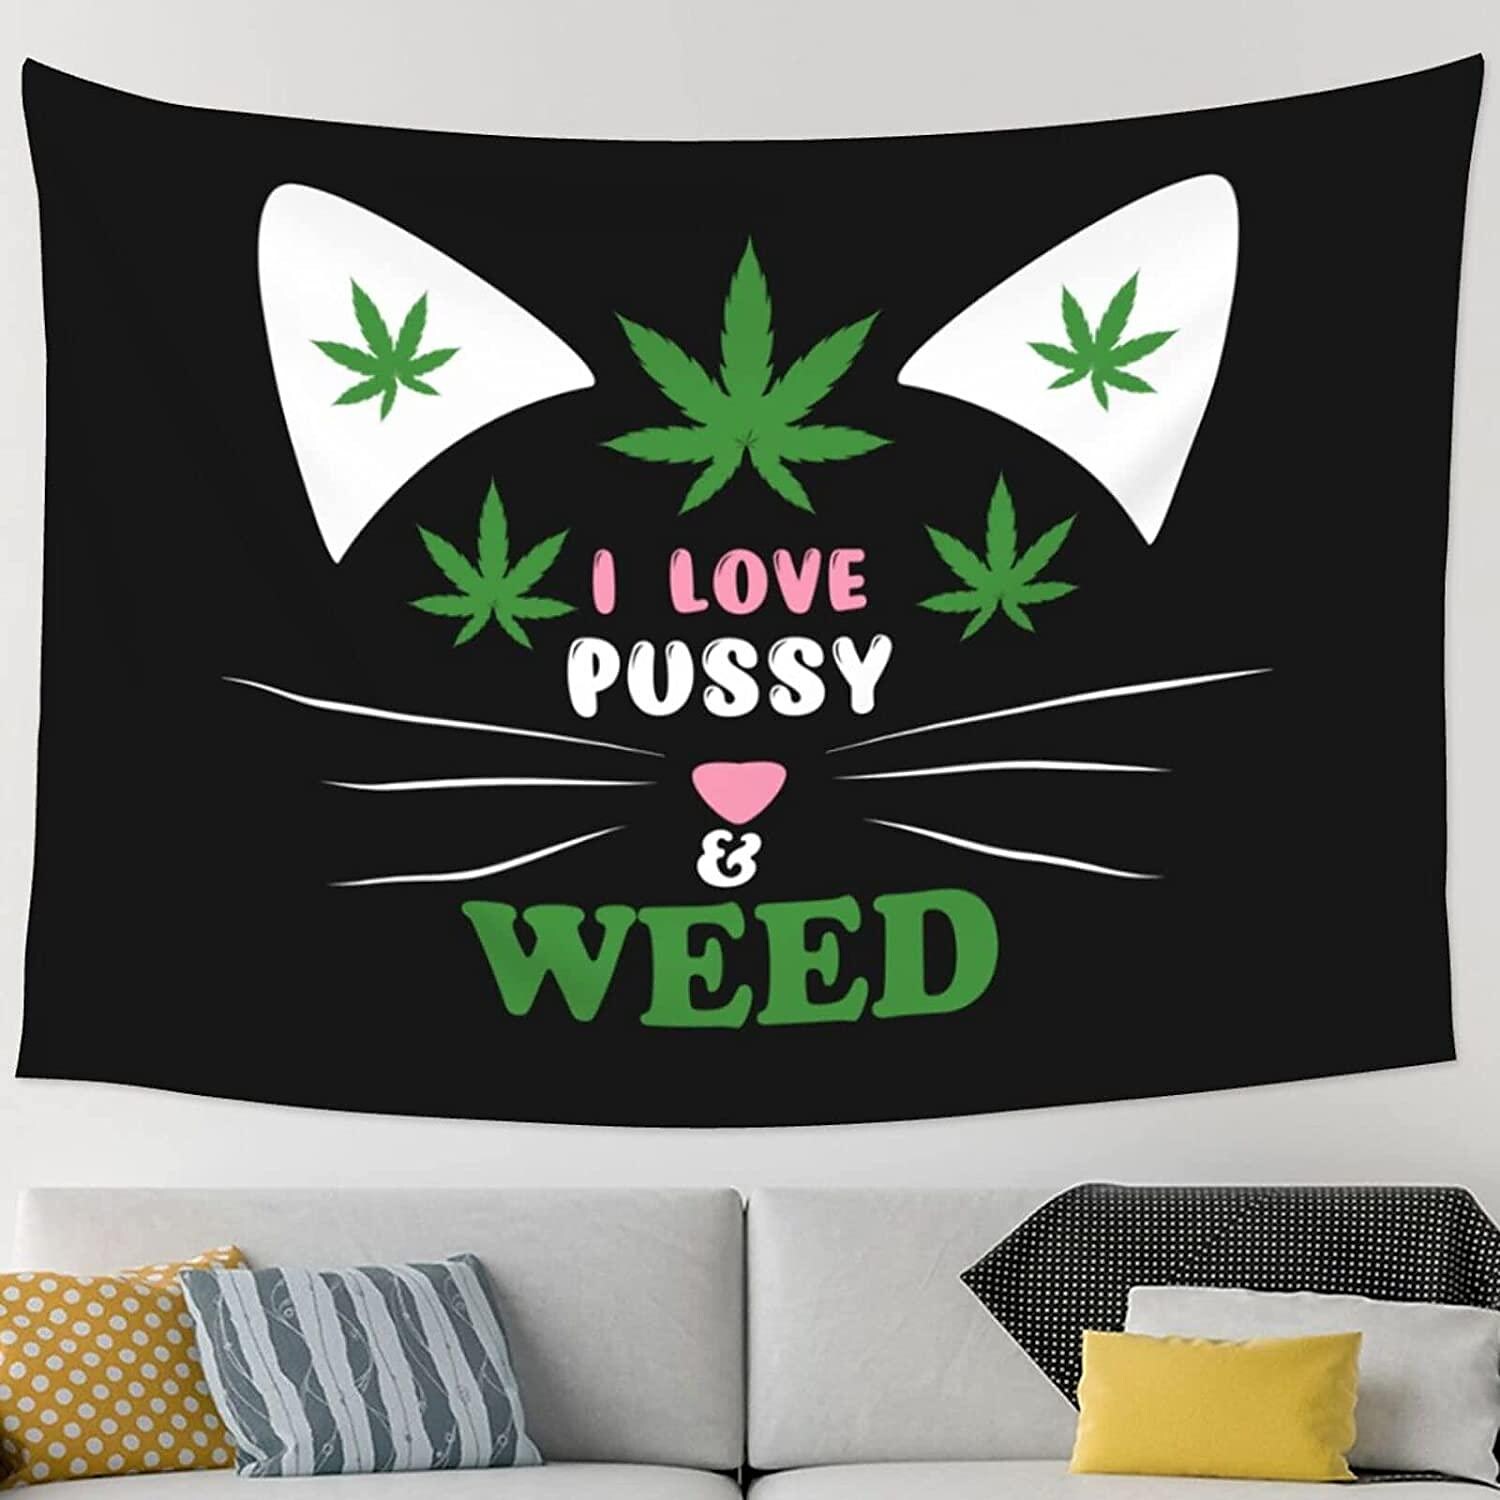 Weed Wall Tapestry Trippy Art Decor Photograph Backdrop